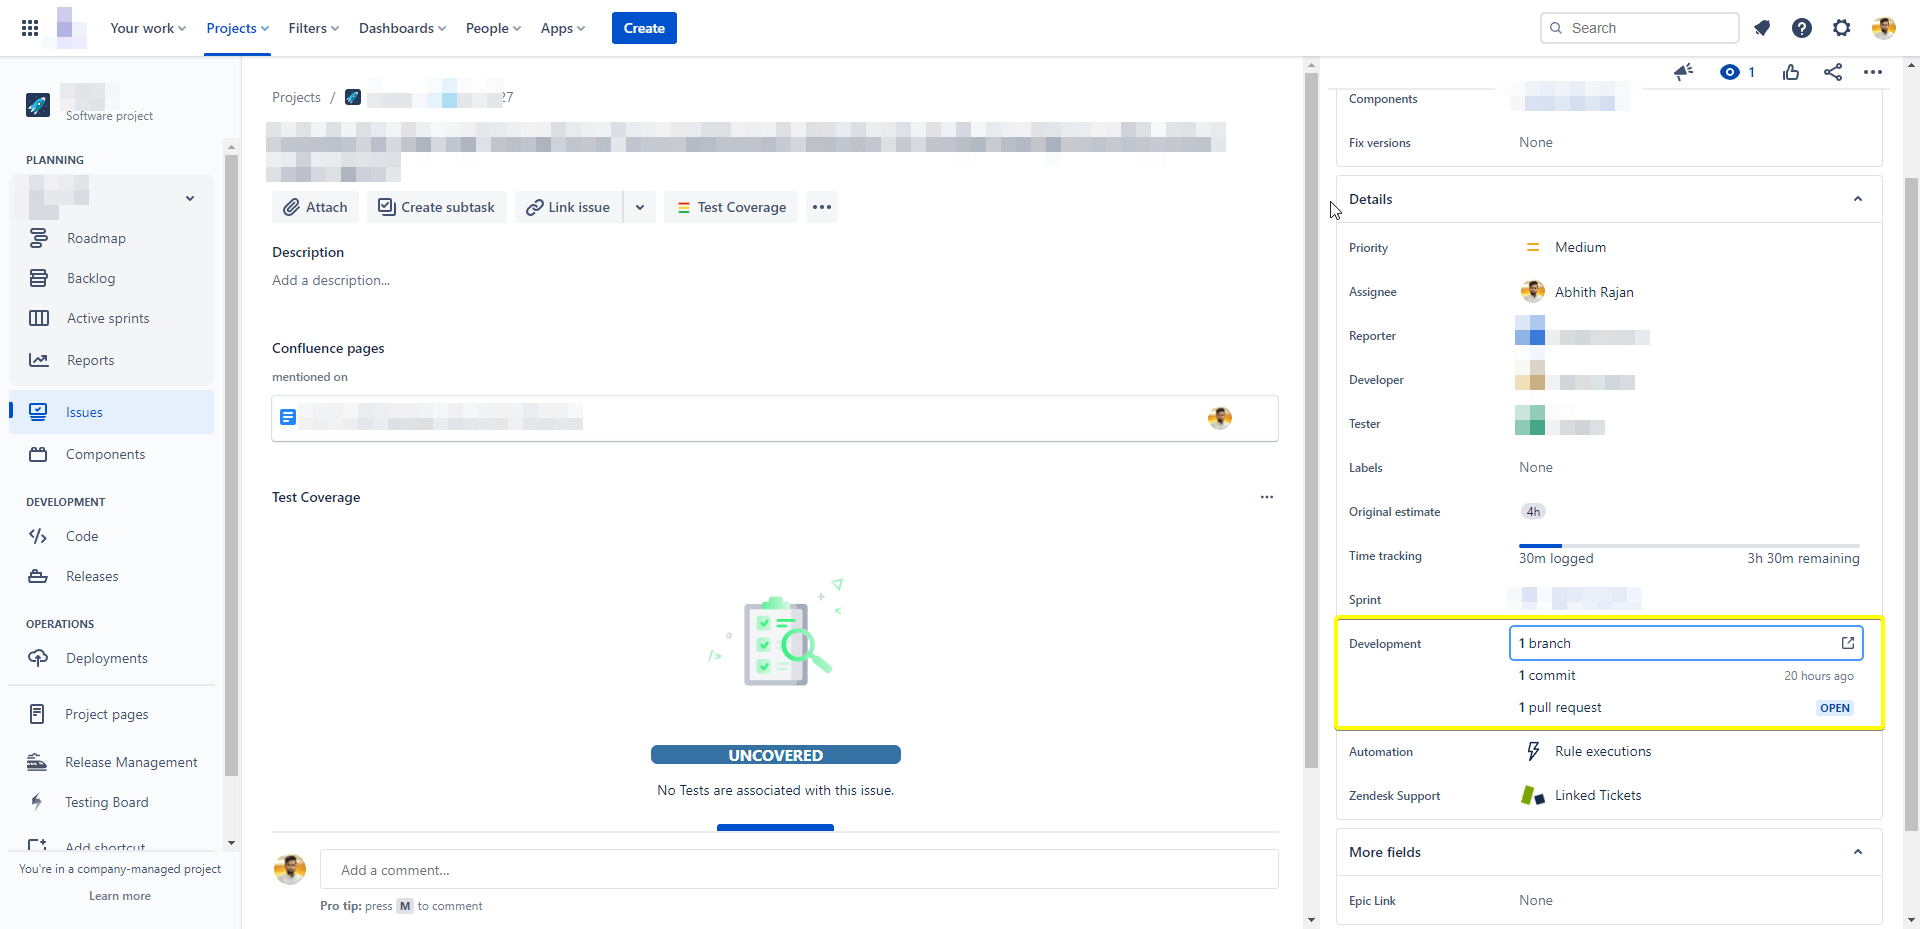 Development links in the Jira issue details